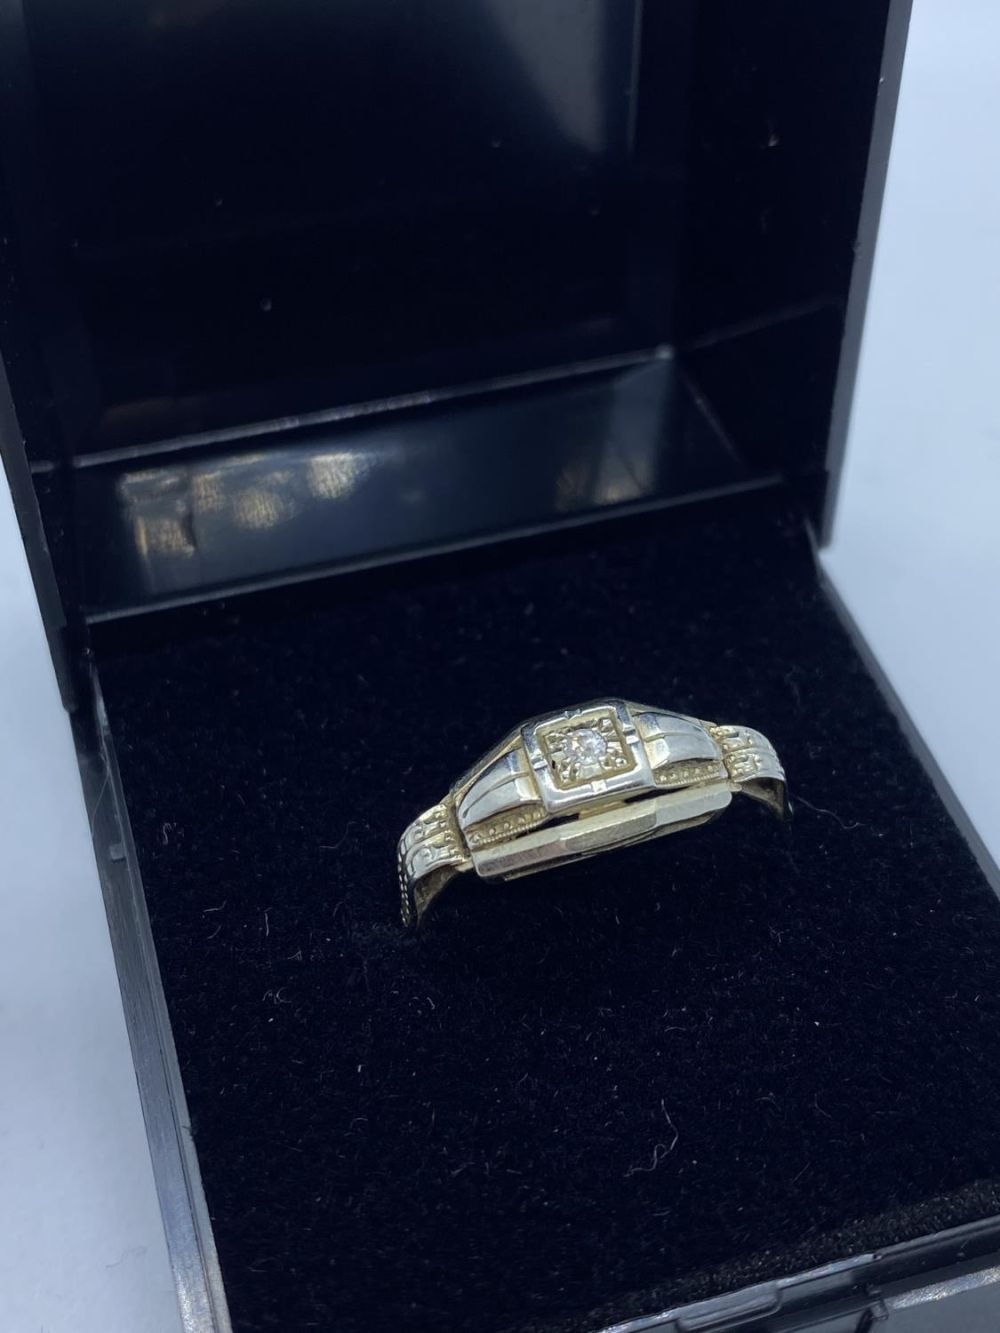 Vintage 18ct Gold Ring with Small Diamond, 1.8, Size P. - Image 2 of 5